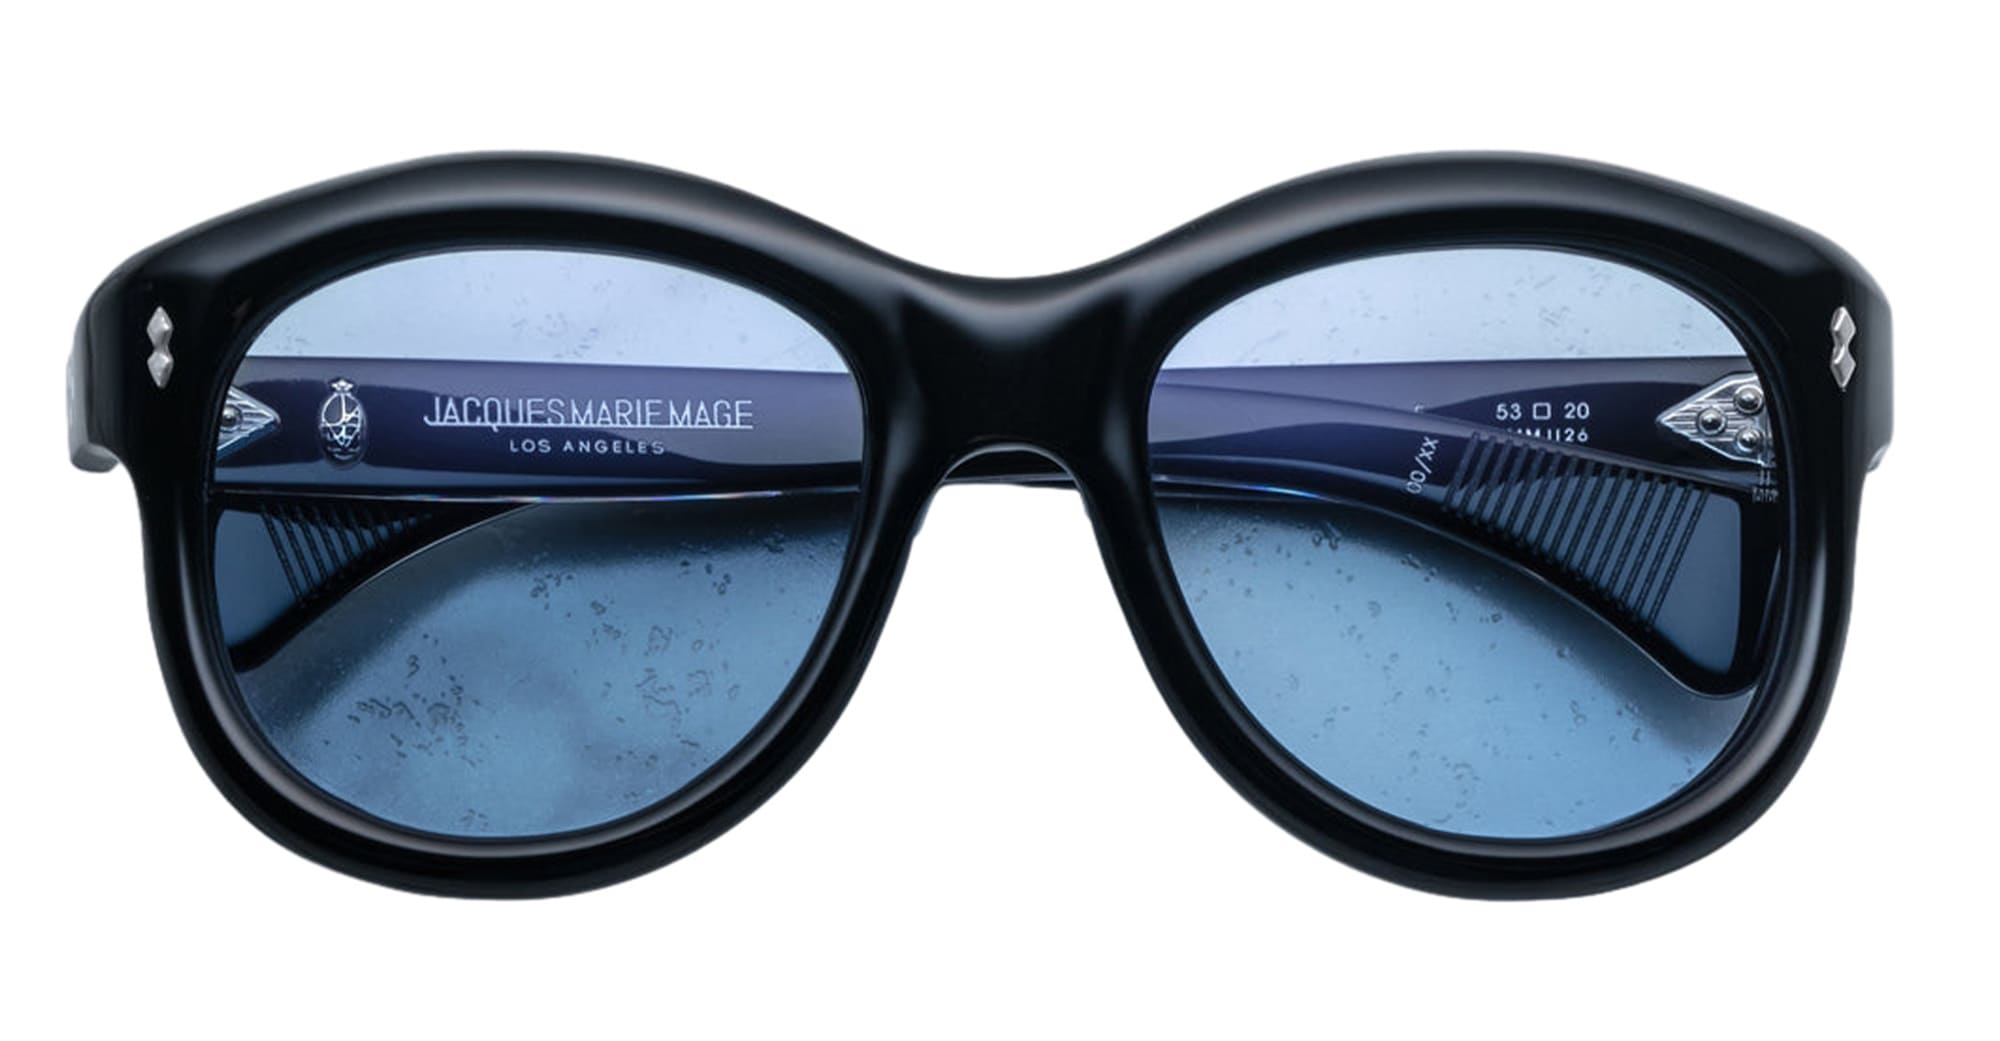 Jacques Marie Mage Eyewear| Jacques Marie Mage Sunglasses – Page 2 